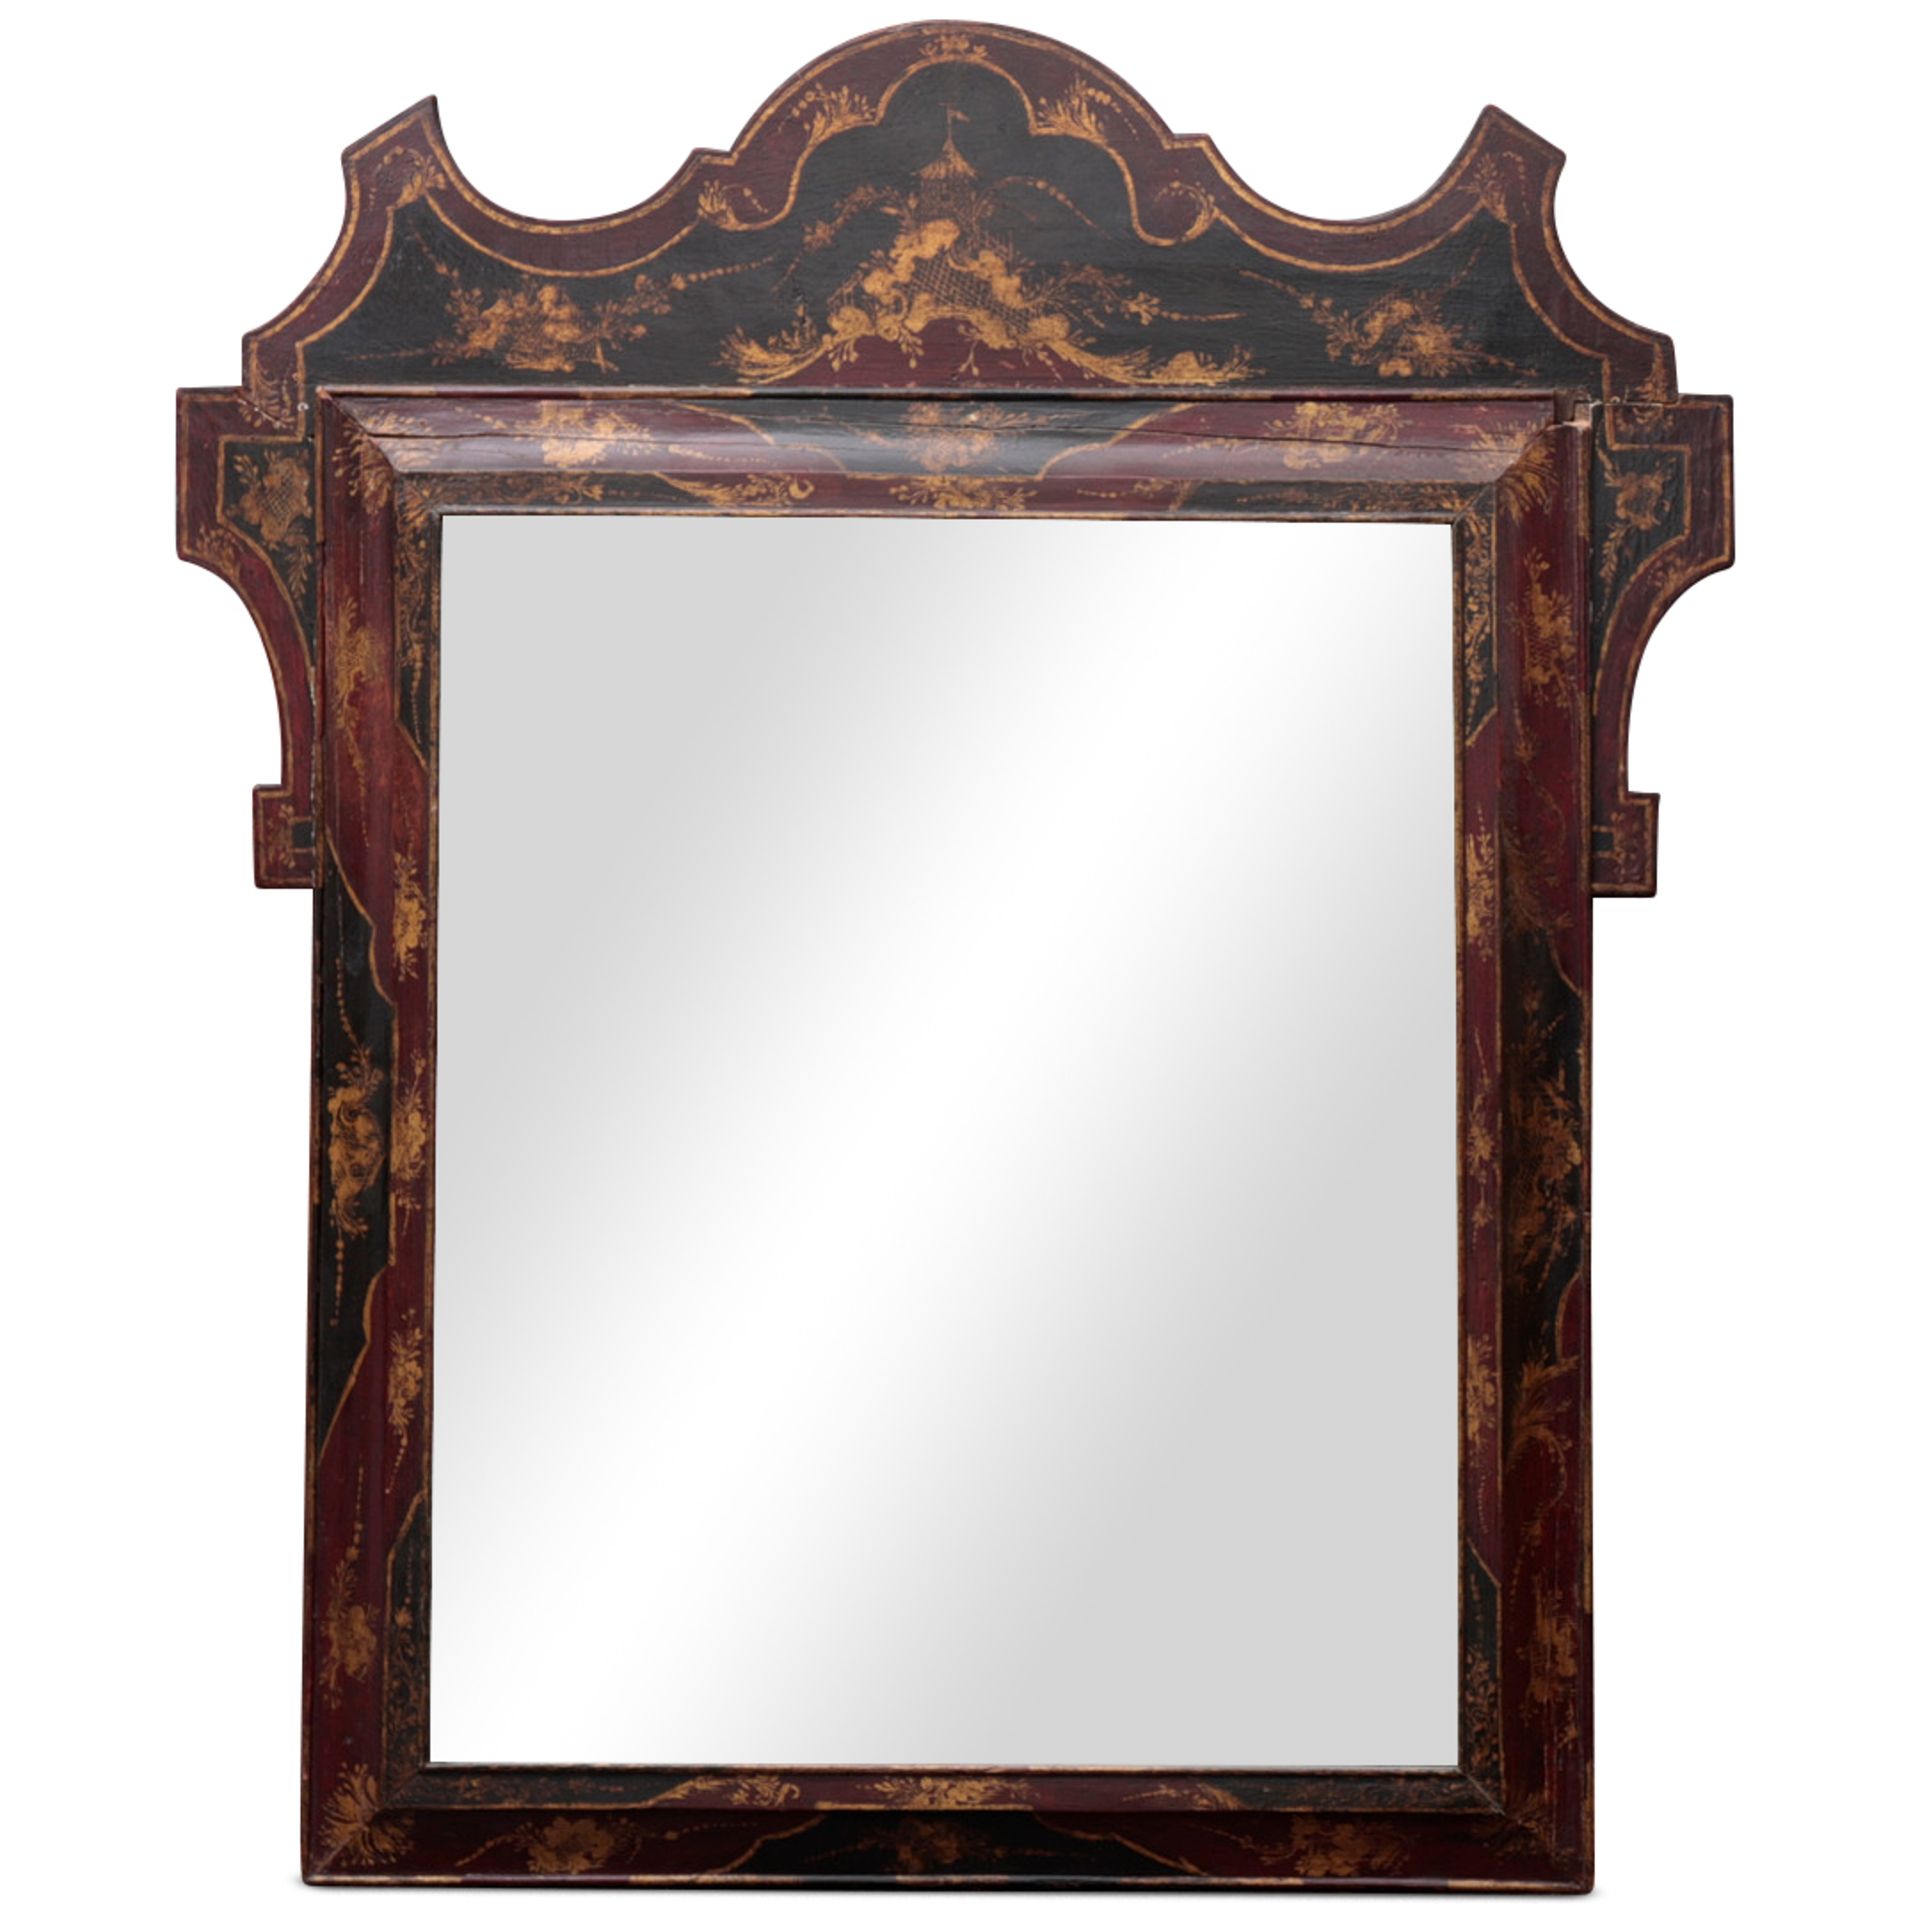 A SPANISH PAINTED WALL MIRROR